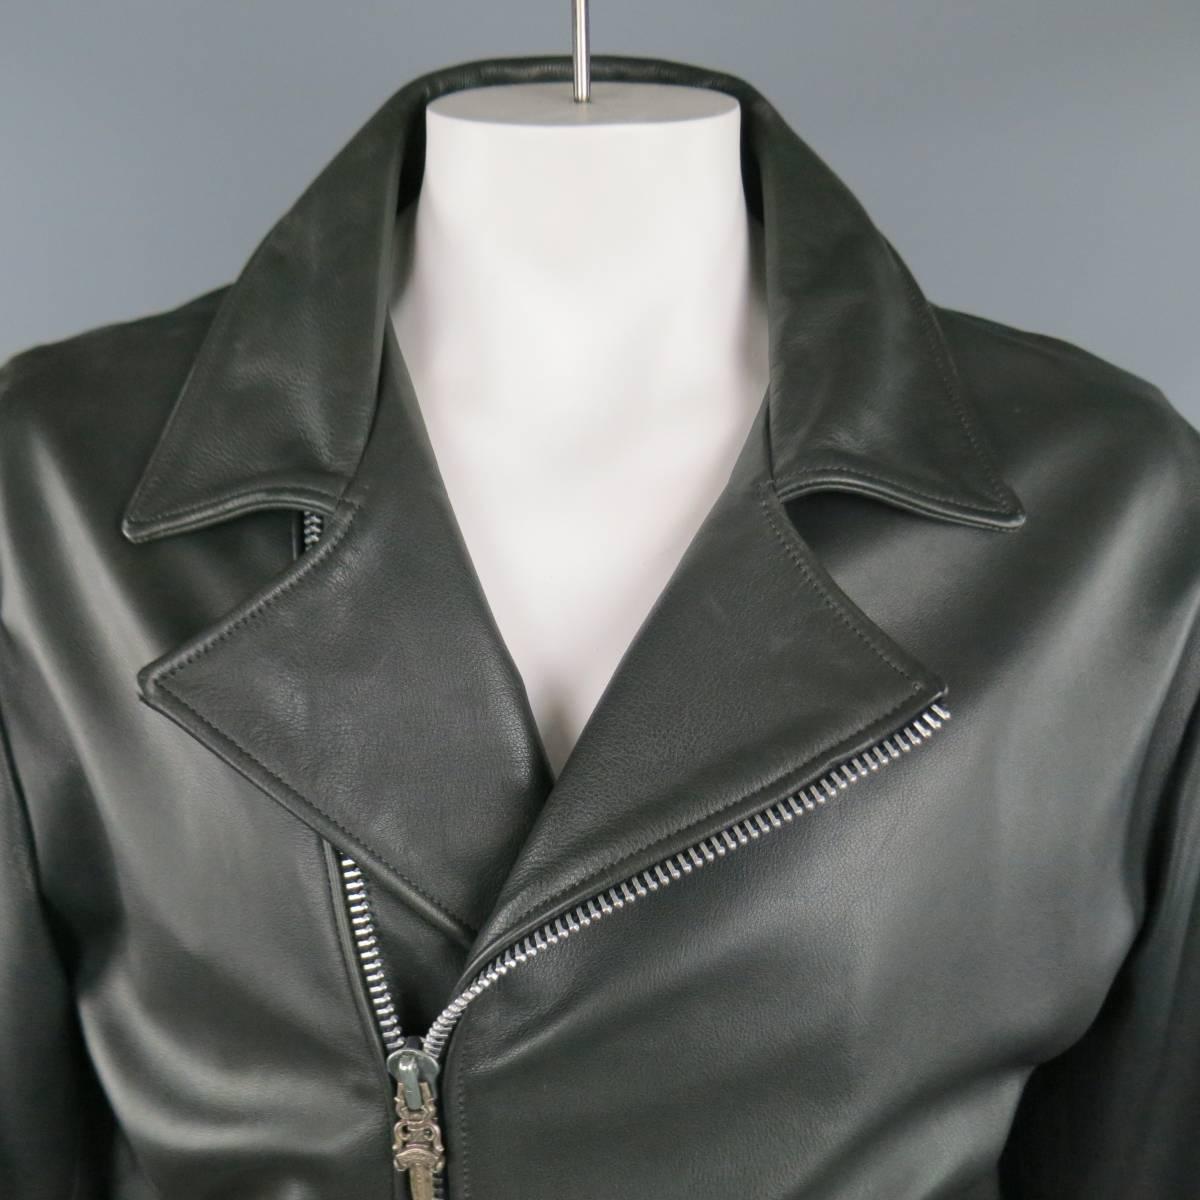 One of a kind, custom CHROME HEARTS motorcycle jacket in black leather featuring a pointed collar, zip front, slanted zip pockets and zip cuffs, all with signature sterling silver engraved sward tabs, lace up sides with sterling silver hardware, and